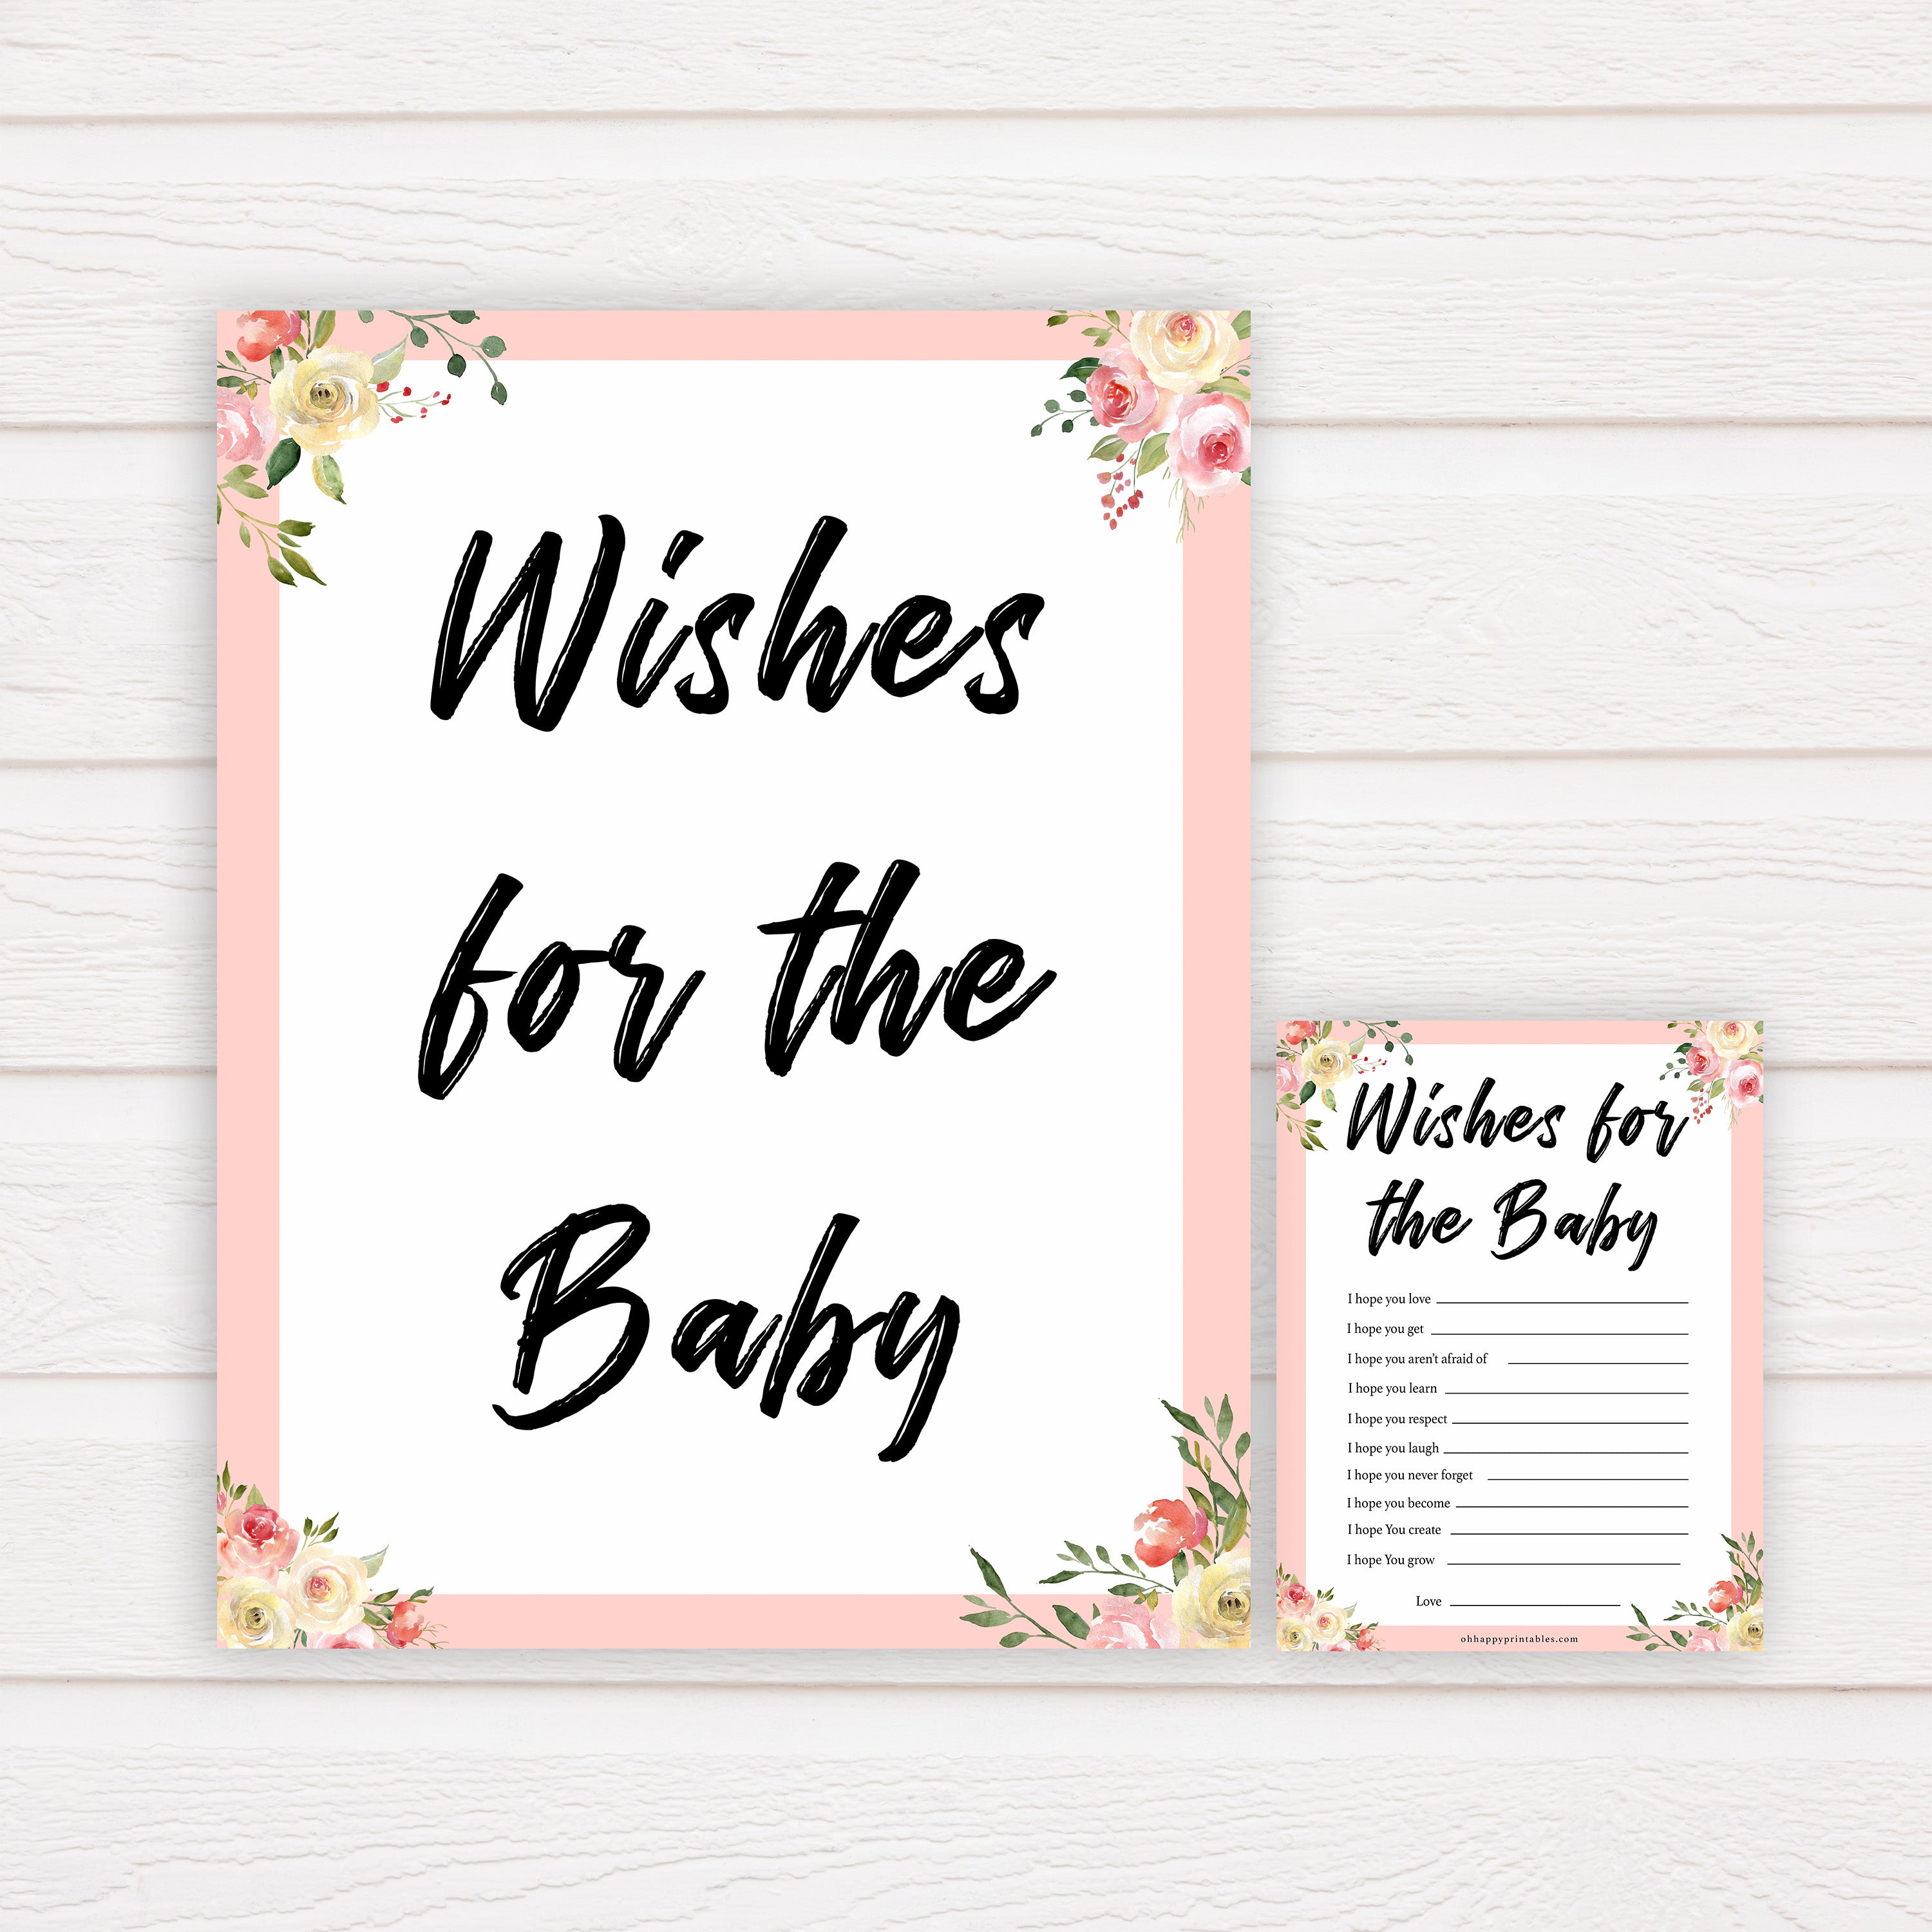 spring floral wishes for the baby baby shower games, printable baby shower games, fun baby shower games, baby shower games, popular baby shower games